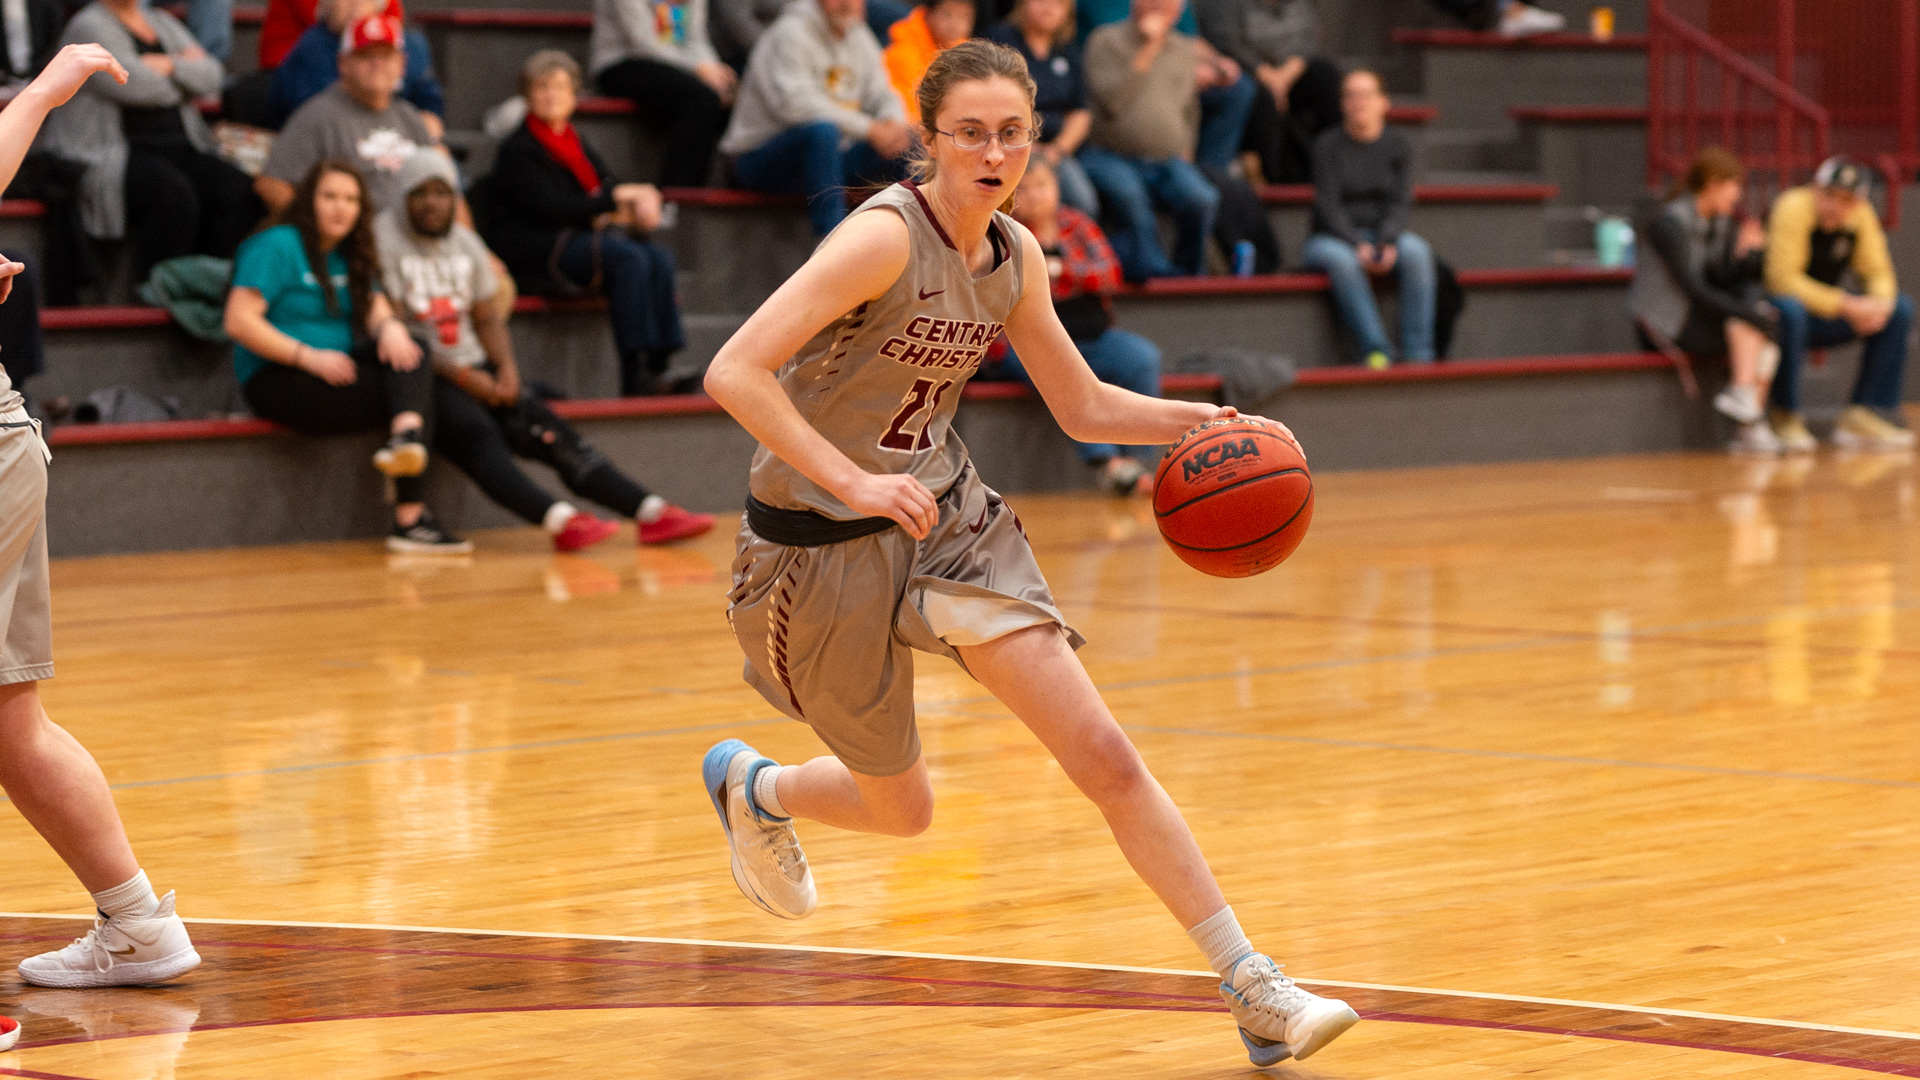 CCCB freshman Katelynn Wampler scored two points and had five rebounds in the Saints' 84-53 loss at Calvary University on Tuesday.